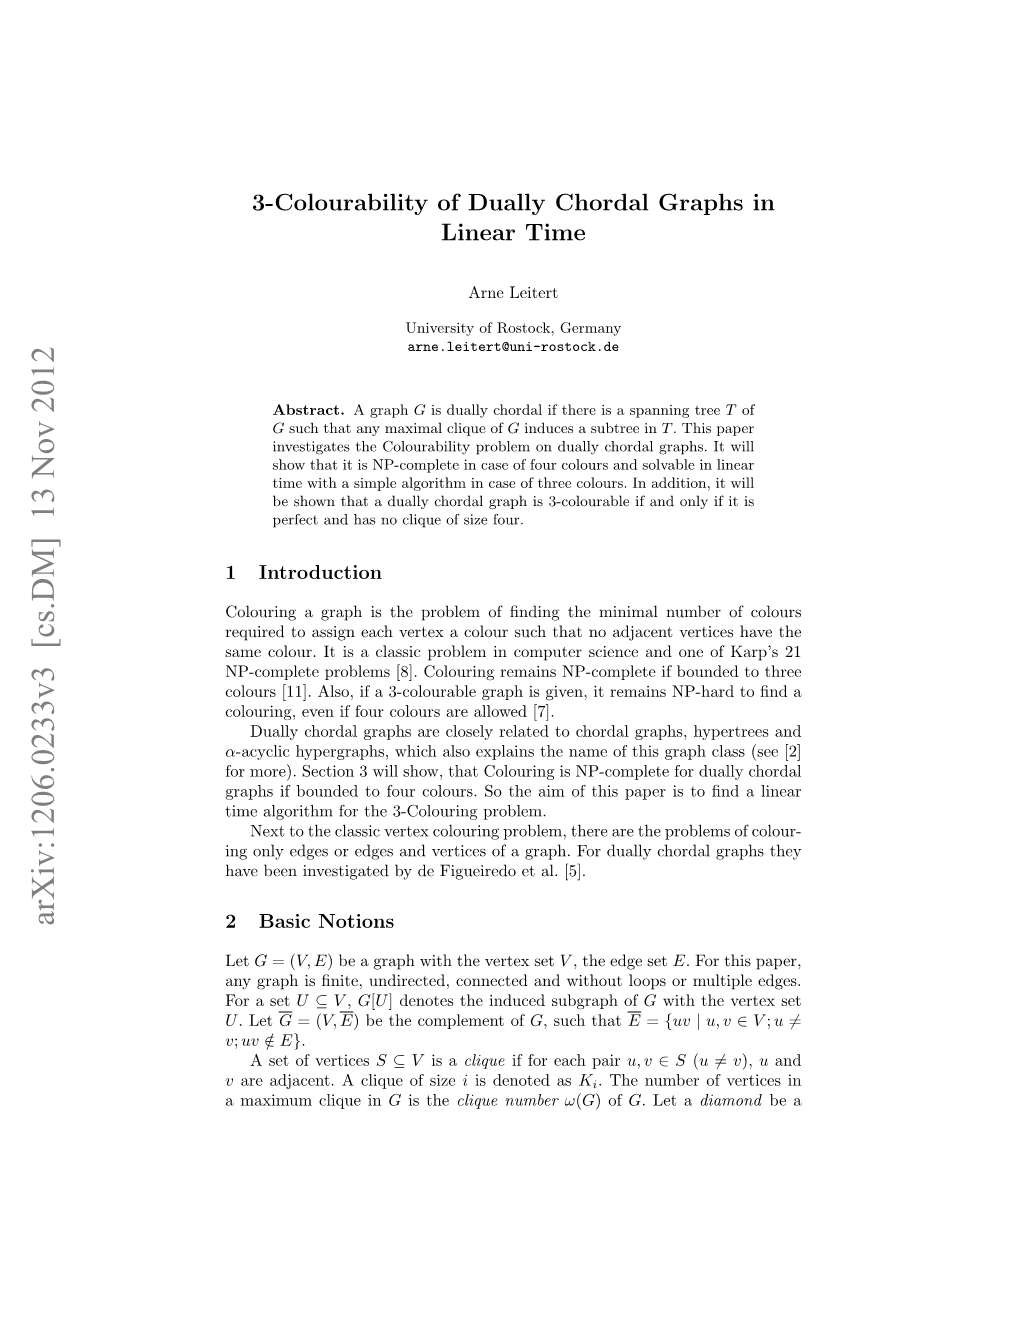 3-Colourability of Dually Chordal Graphs in Linear Time